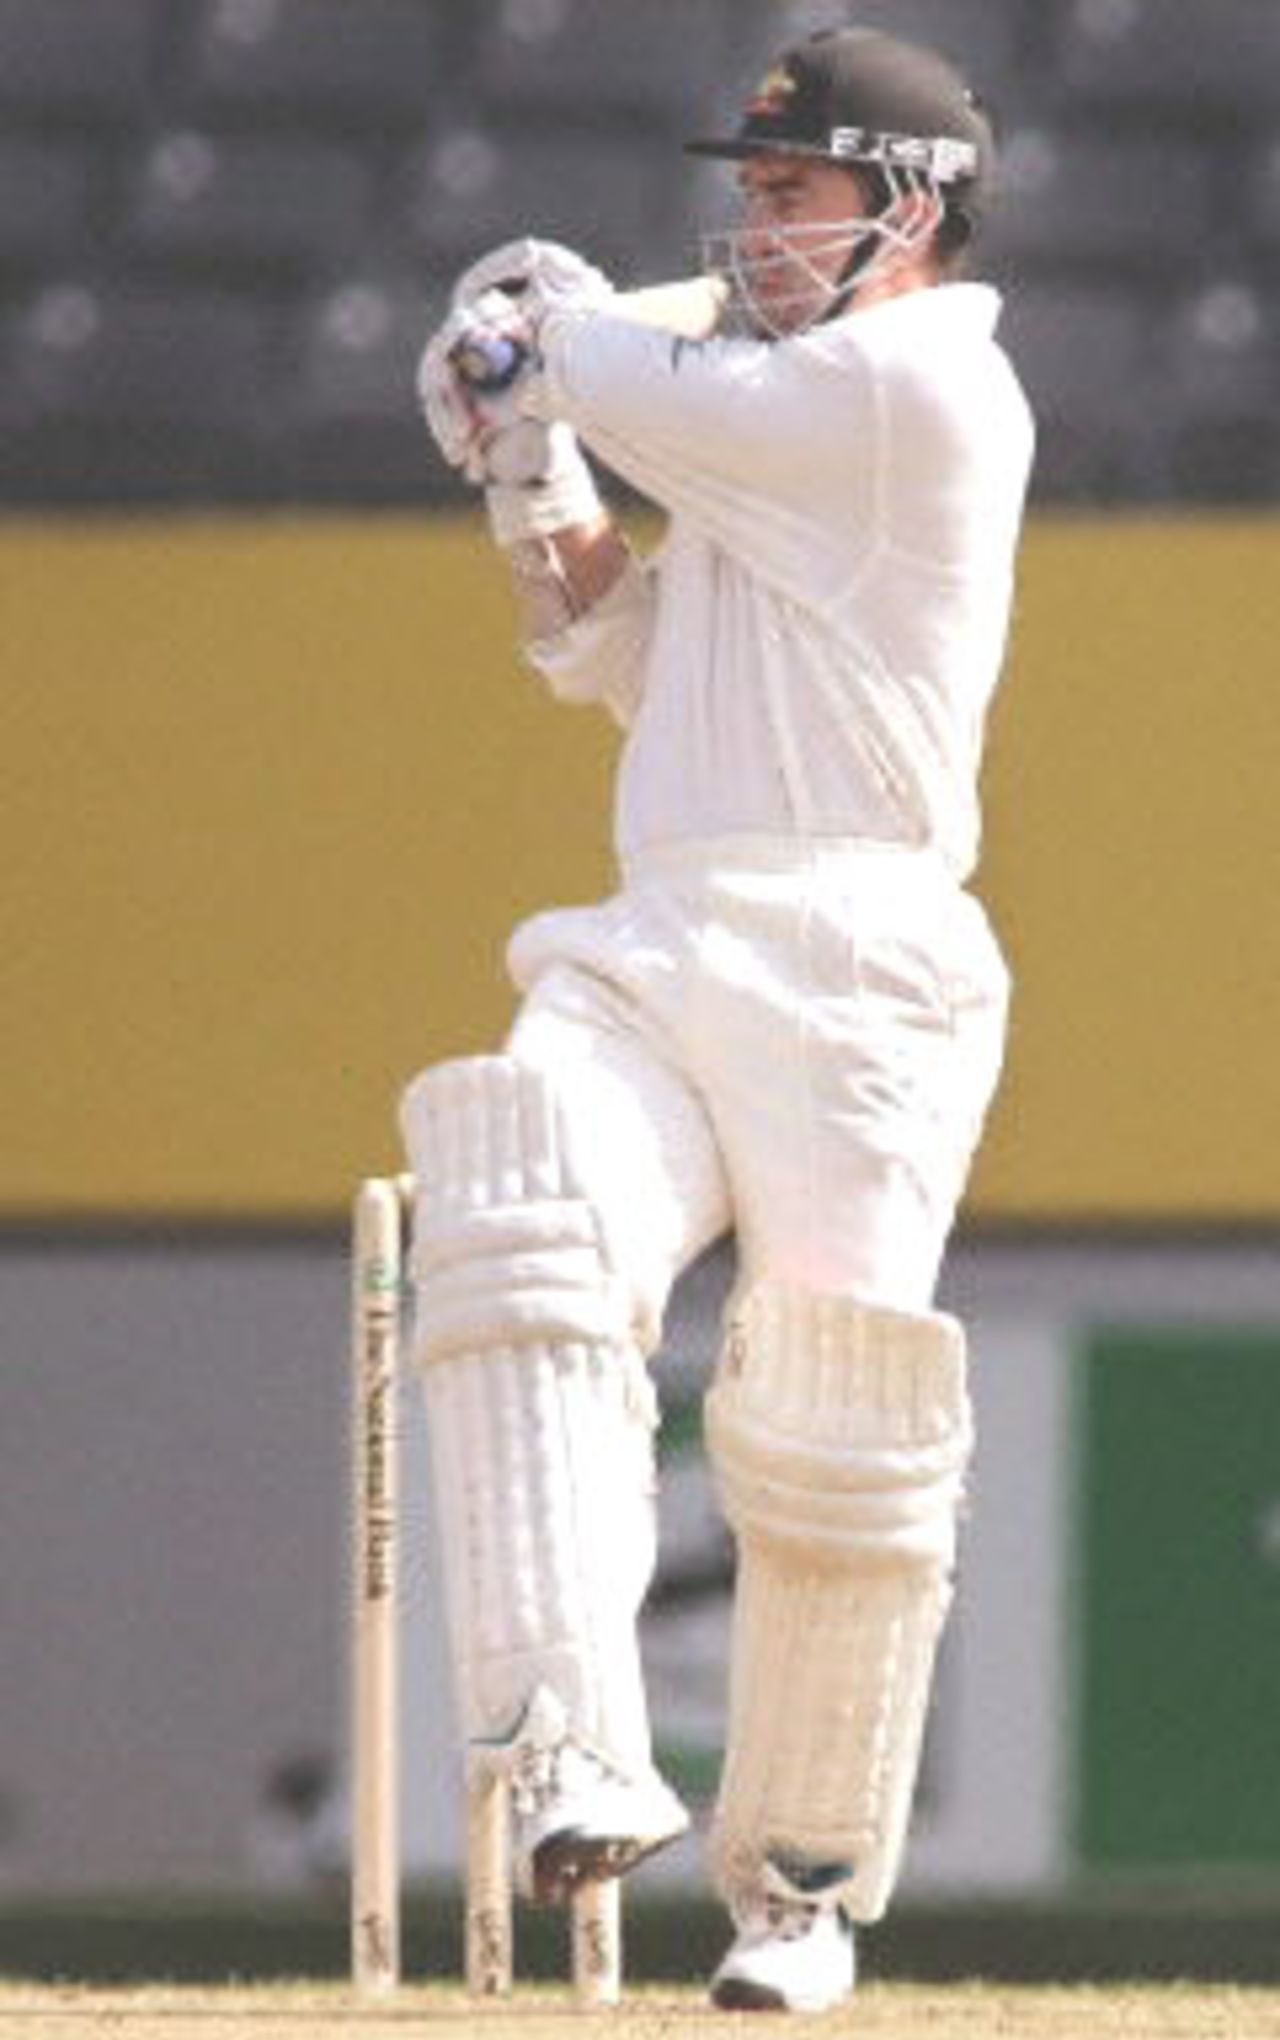 Australian batsman Justin Langer hooks a ball on the way to an innings of 46 runs against New Zealand on the first day of the first Test match being played at Eden Park in Auckland, 11 March 2000. Australia was dismissed for 214 in their first innings and in reply New Zealand is in trouble at 26-4 at stumps.